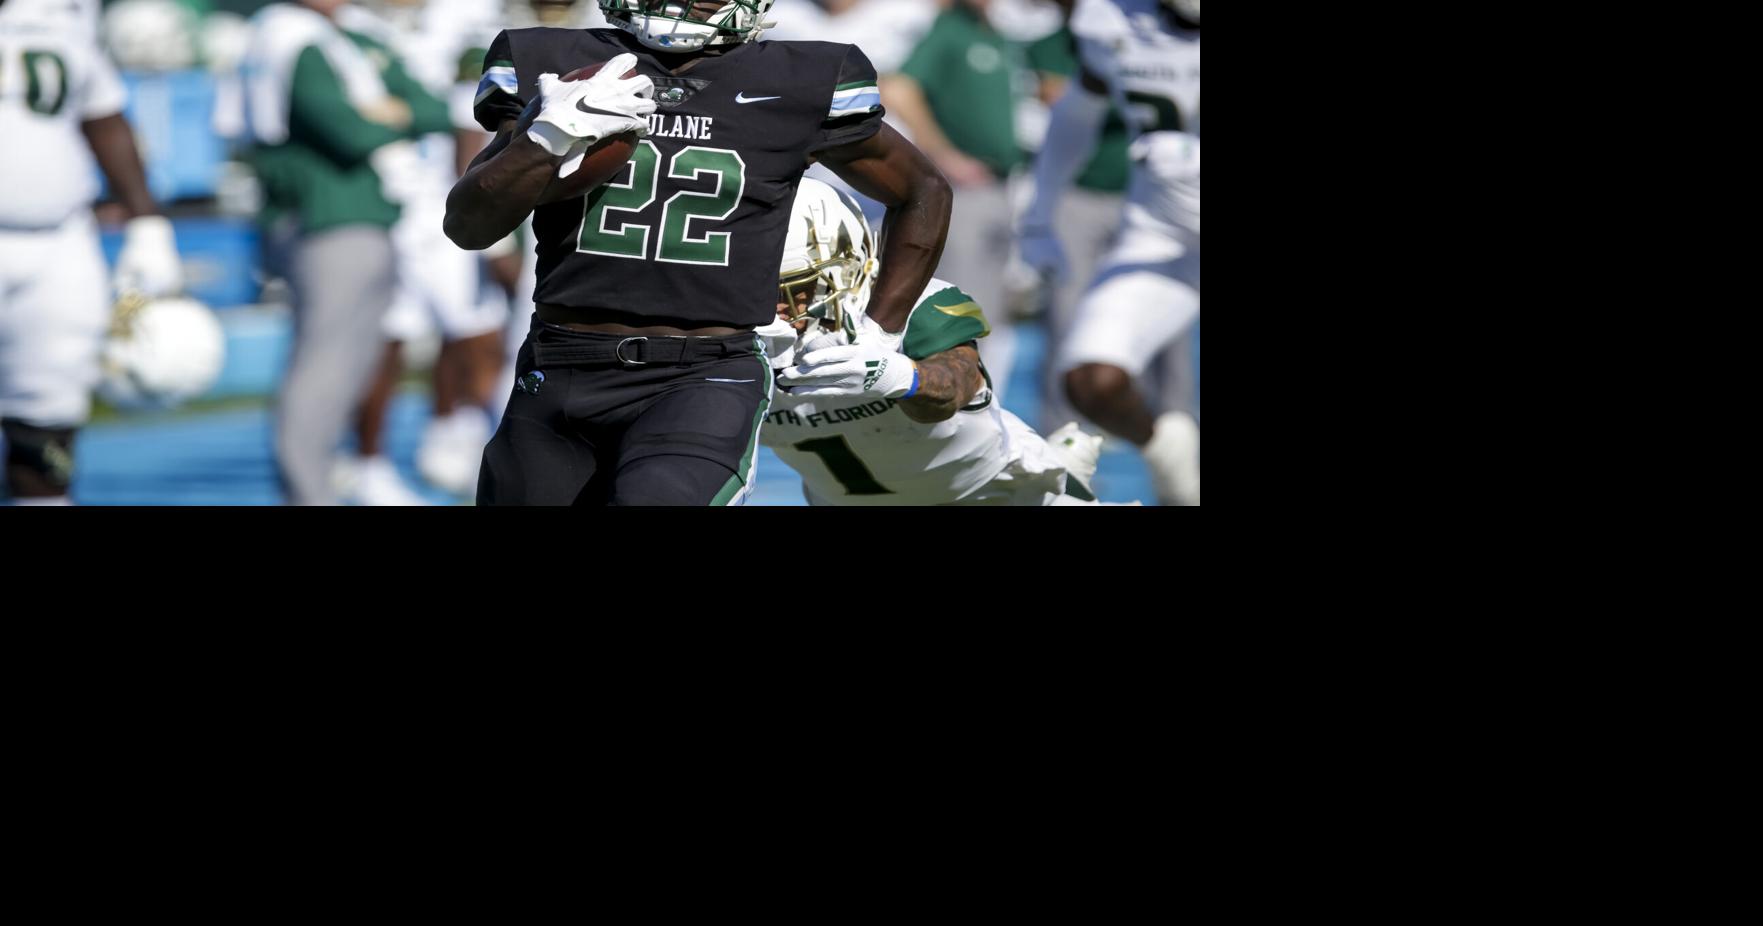 Dazzling in defeat: Tulane's Tyjae Spears did everything he could to topple Memphis - NOLA.com